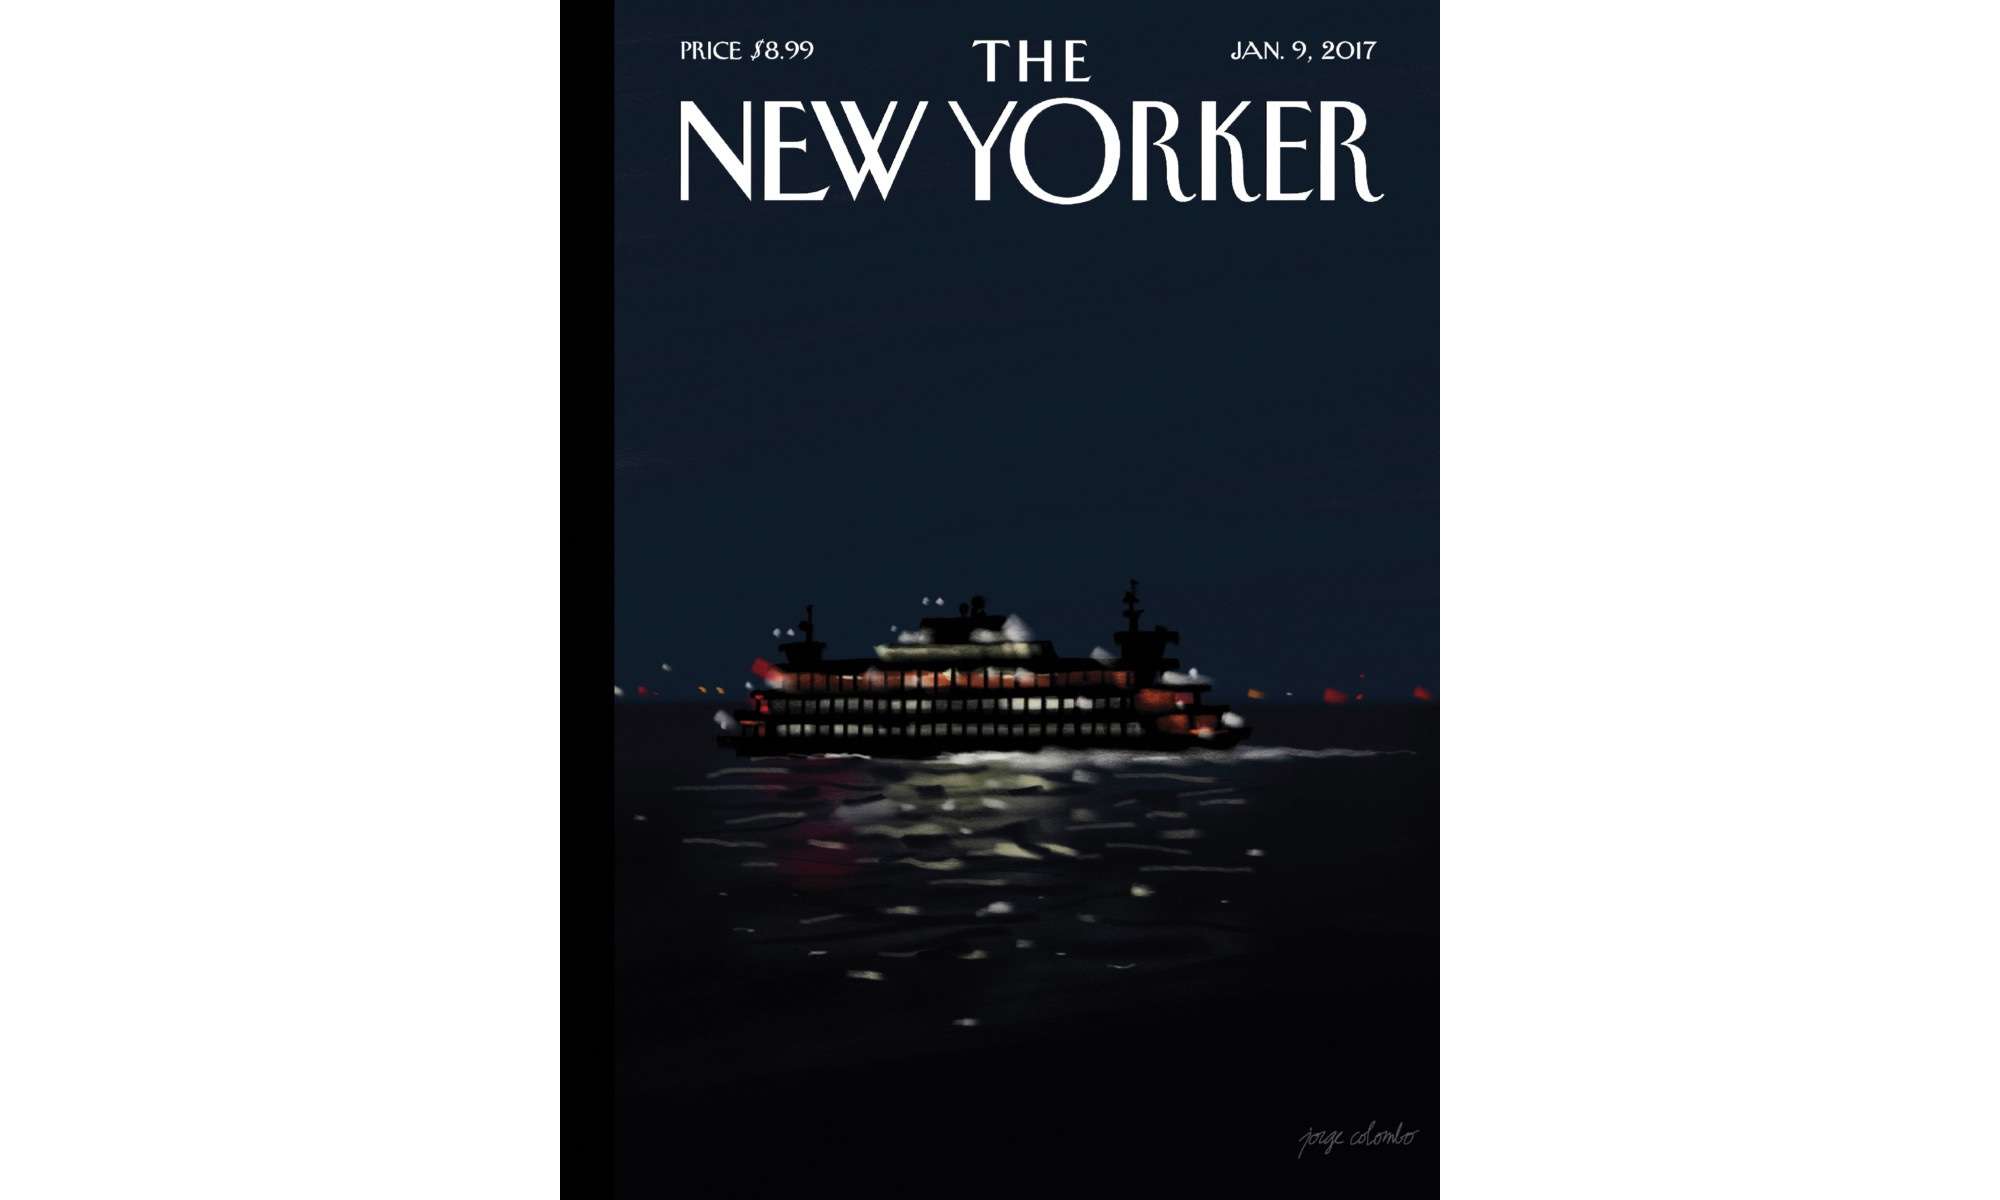 Jorge Colombo drew the New Yorker cover on iPad Pro.